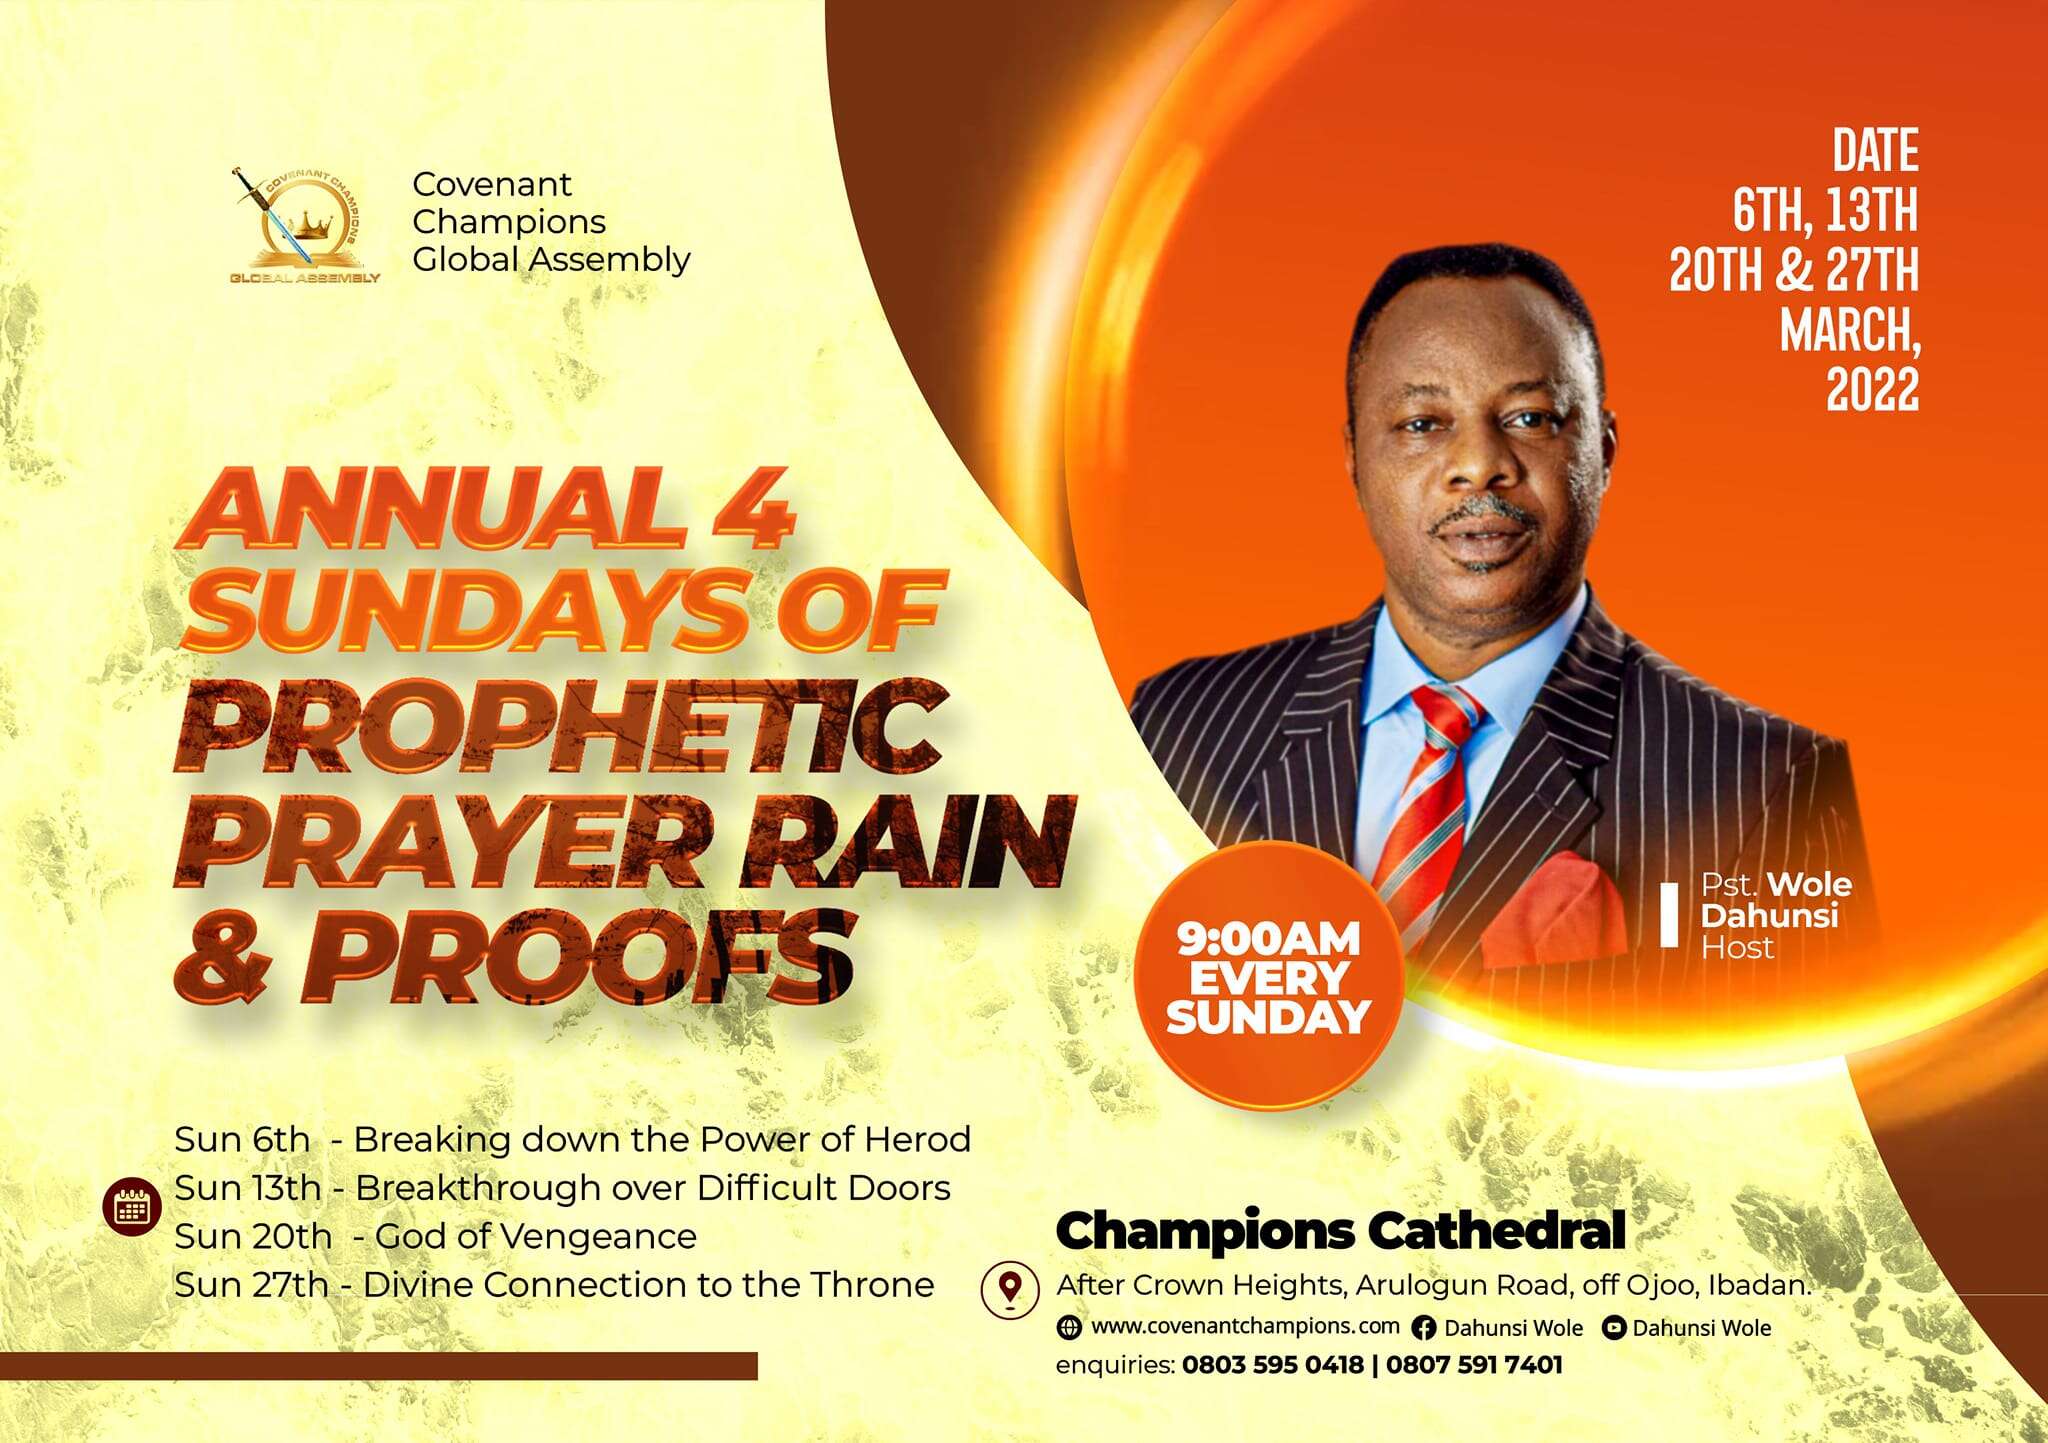 Annual 4 Sundays of Prophetic Prayer Rain and Proofs